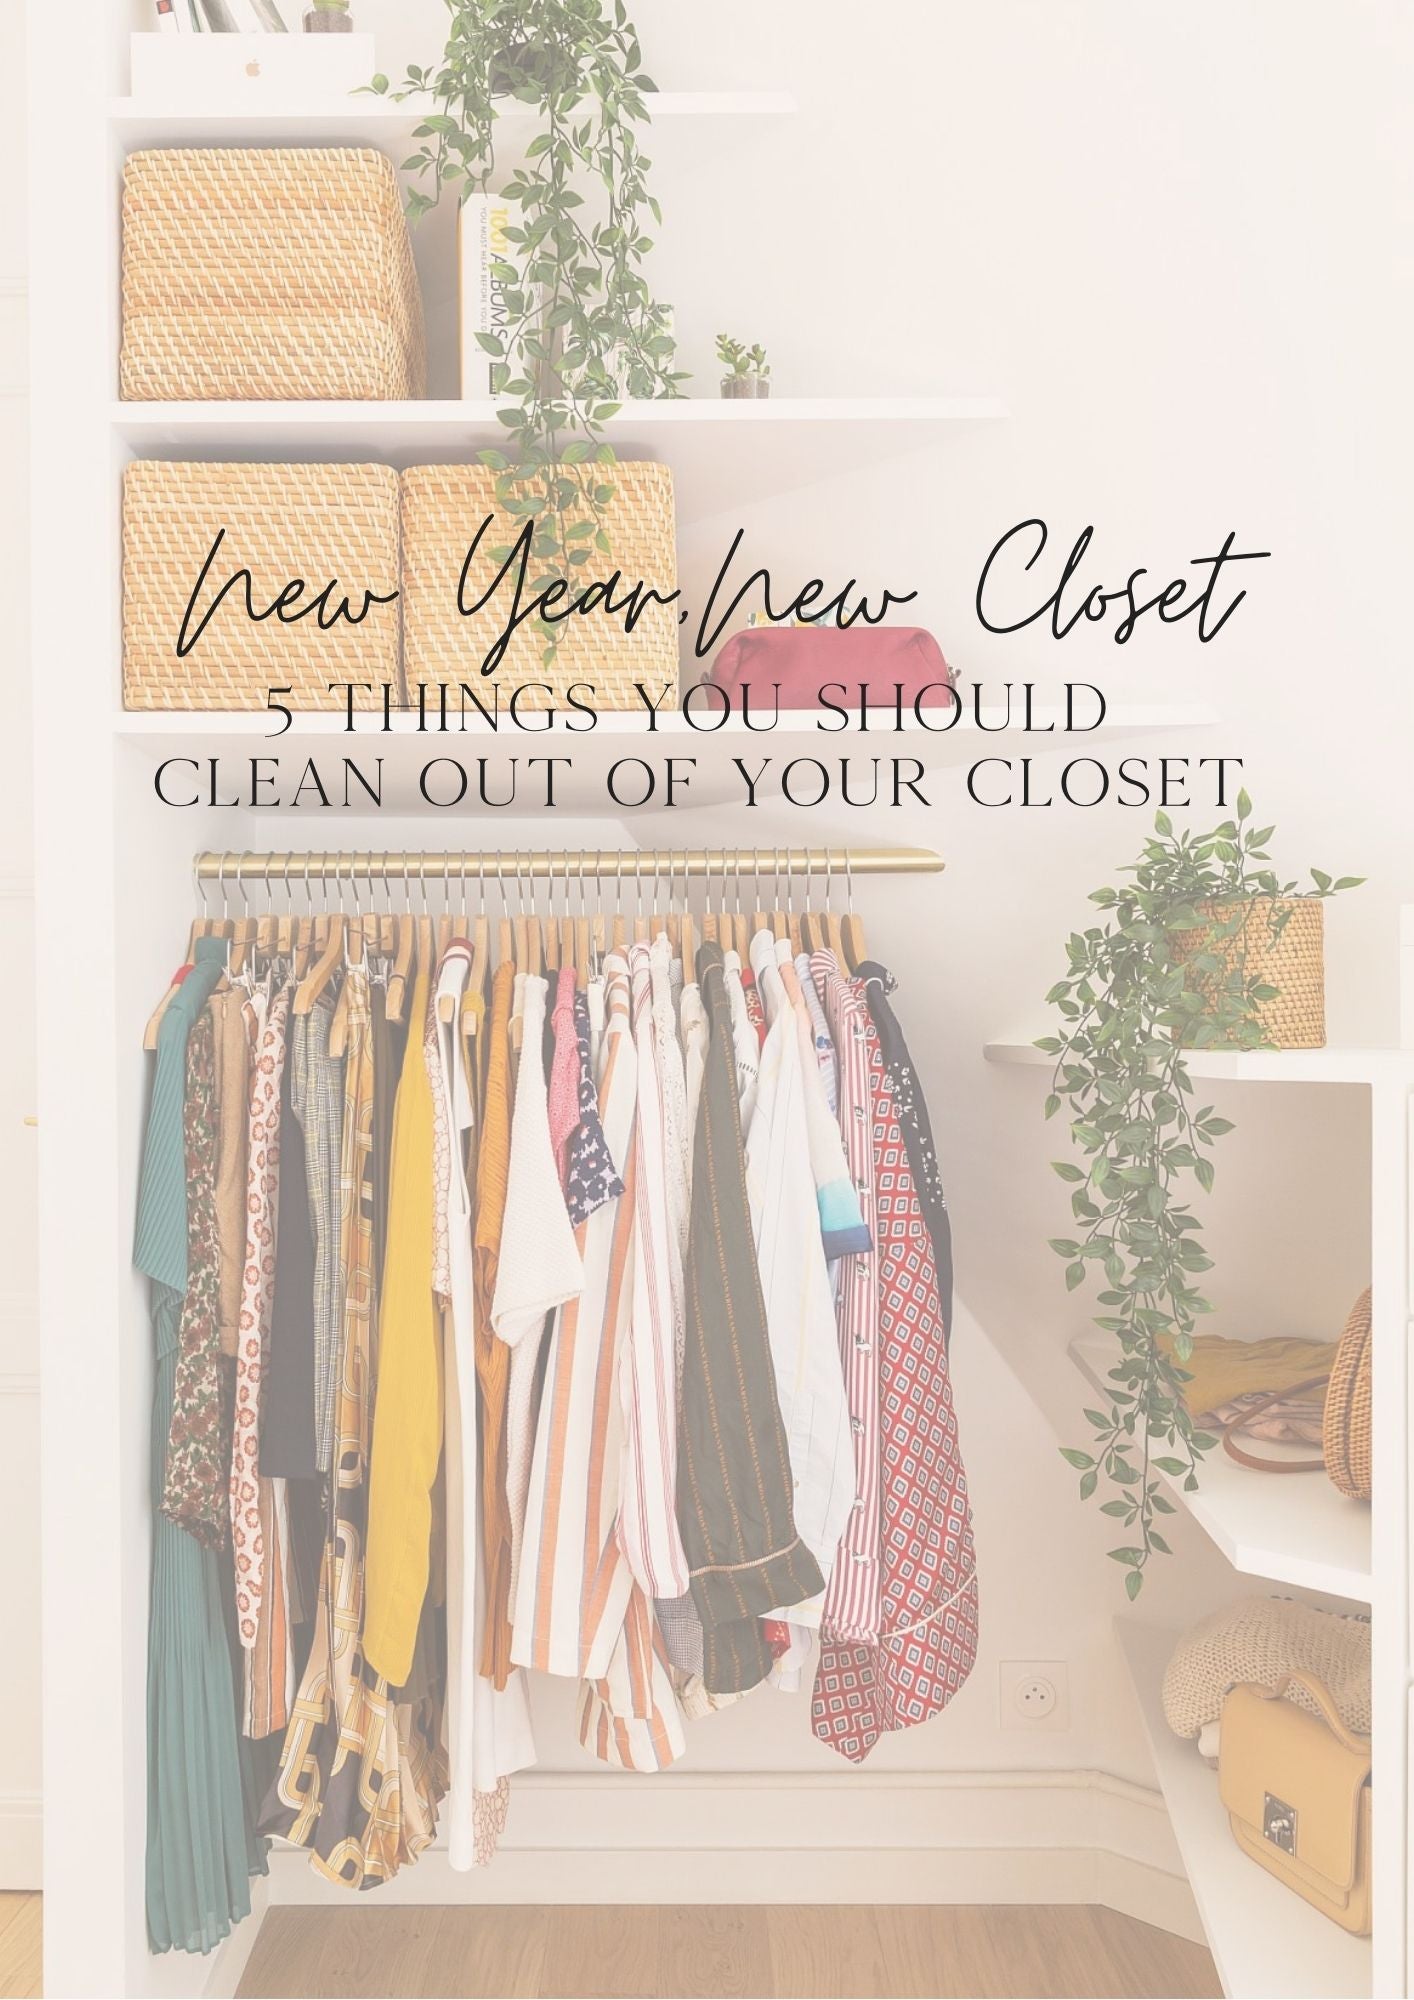 New Year, New Closet: 5 Things You Should Clean Out of Your Closet